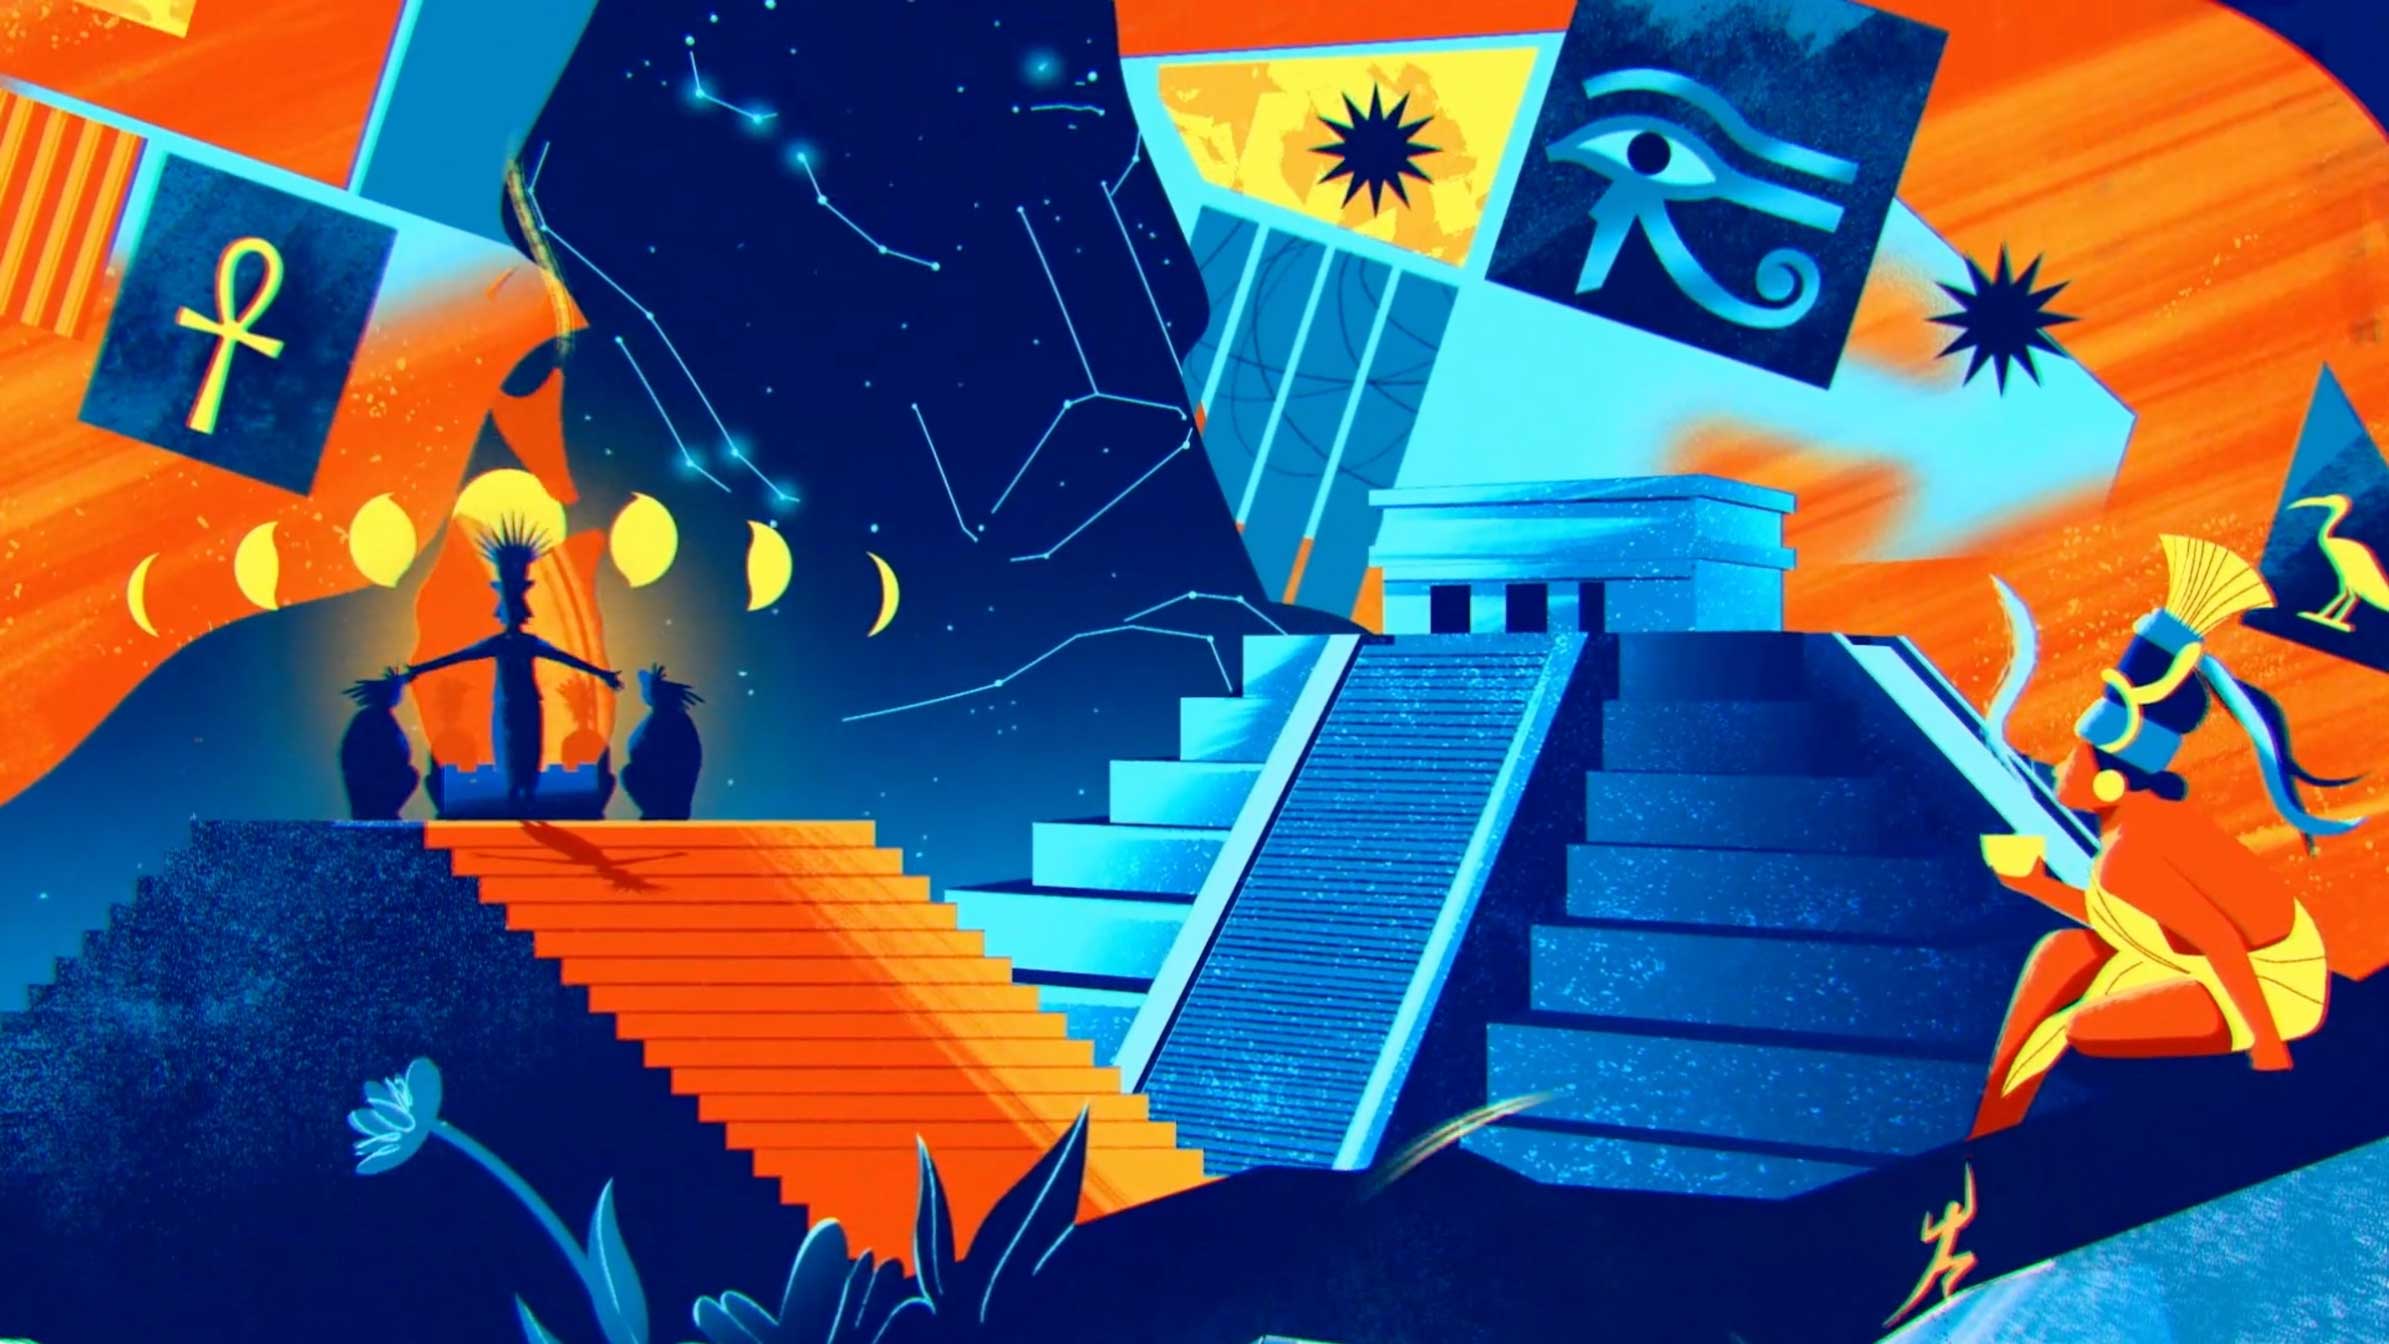 SMOG Considers Creative Evolution in "Let There be Light!" Short Film - Motion design [Video]